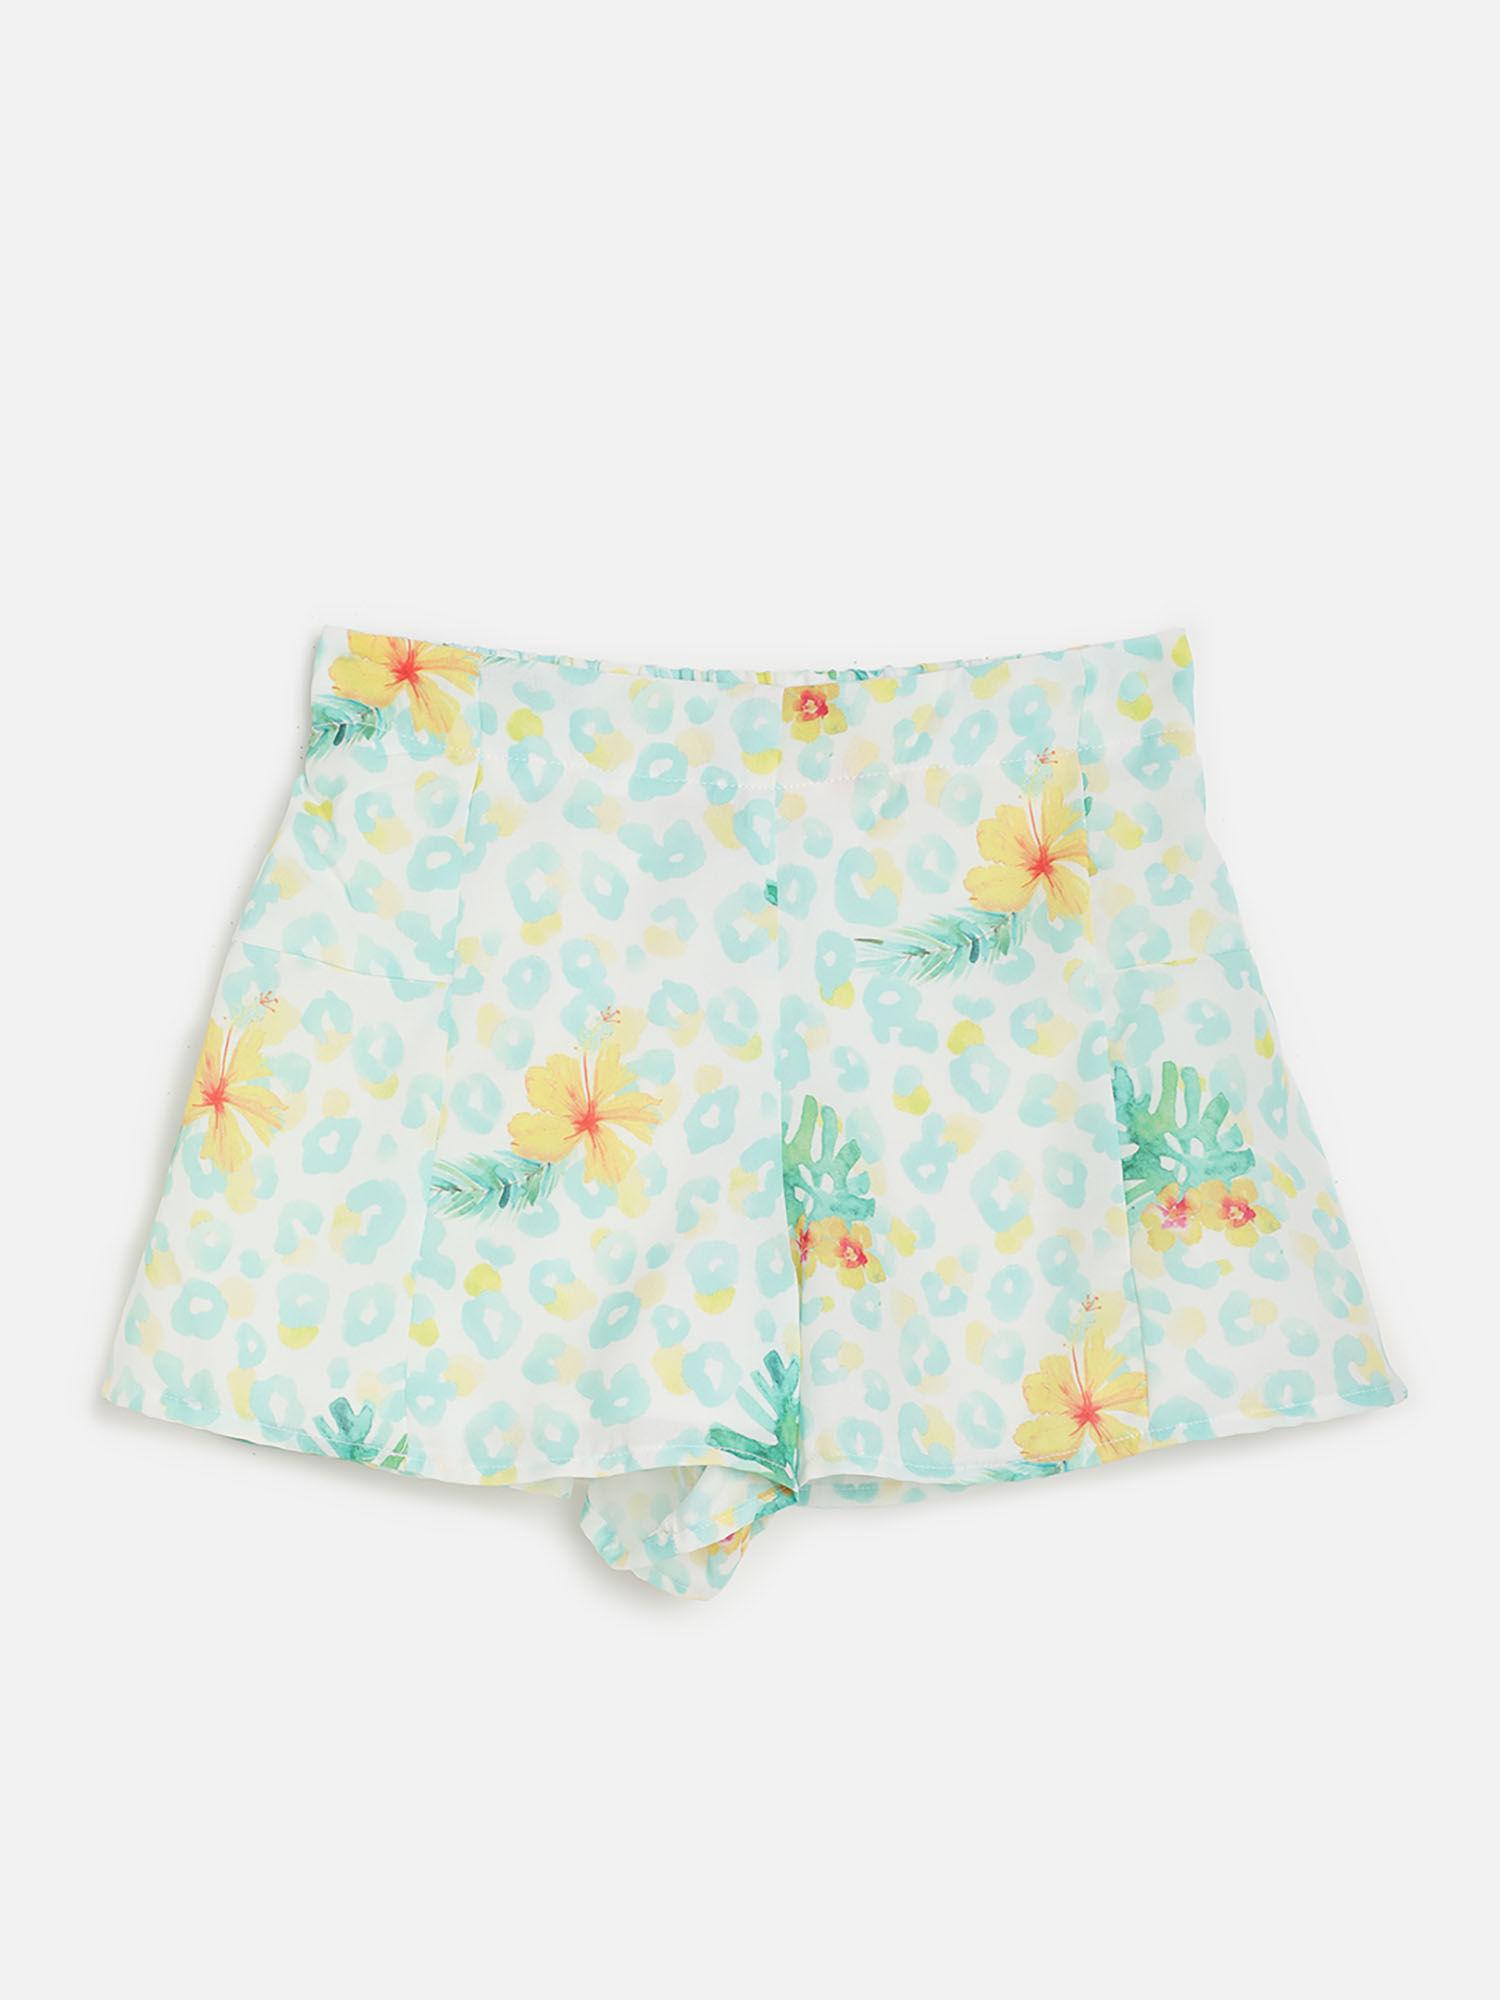 fashion-casual-girls-cotton-printed-off-white-shorts